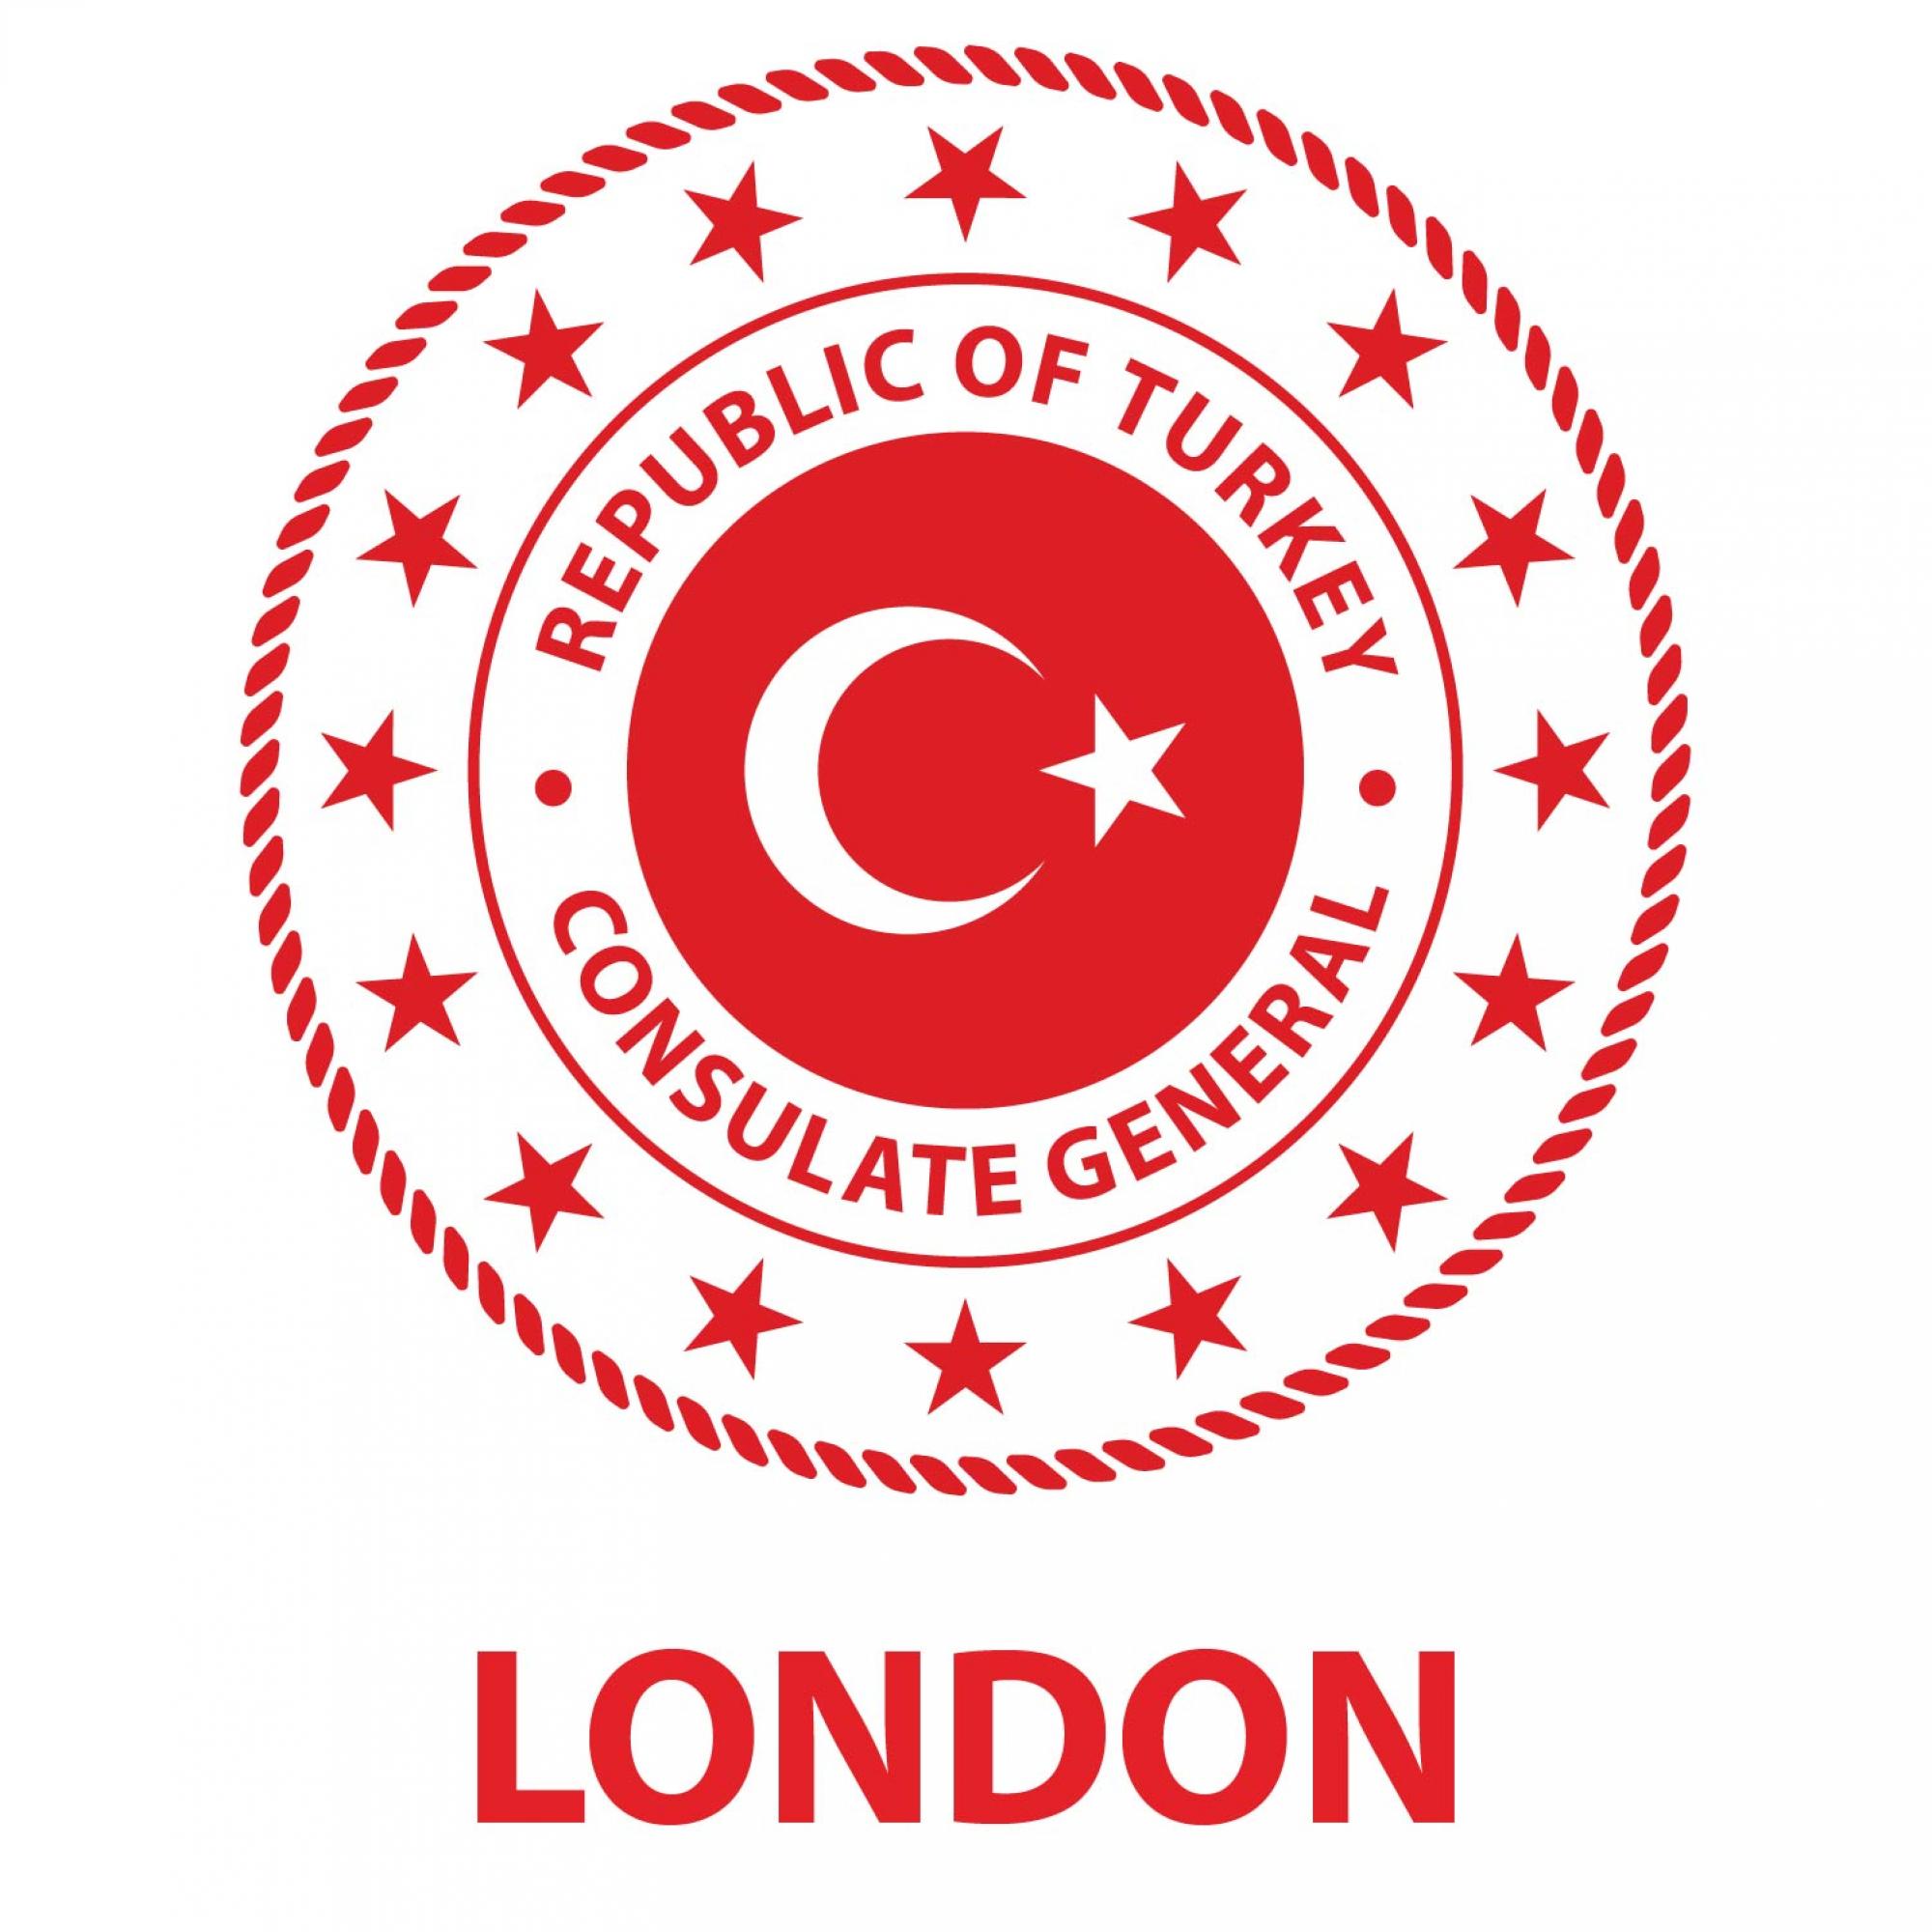 https://www.4dplanning.com/case-studies/change-of-use-office-to-turkish-consulate-embassy-manchester-city